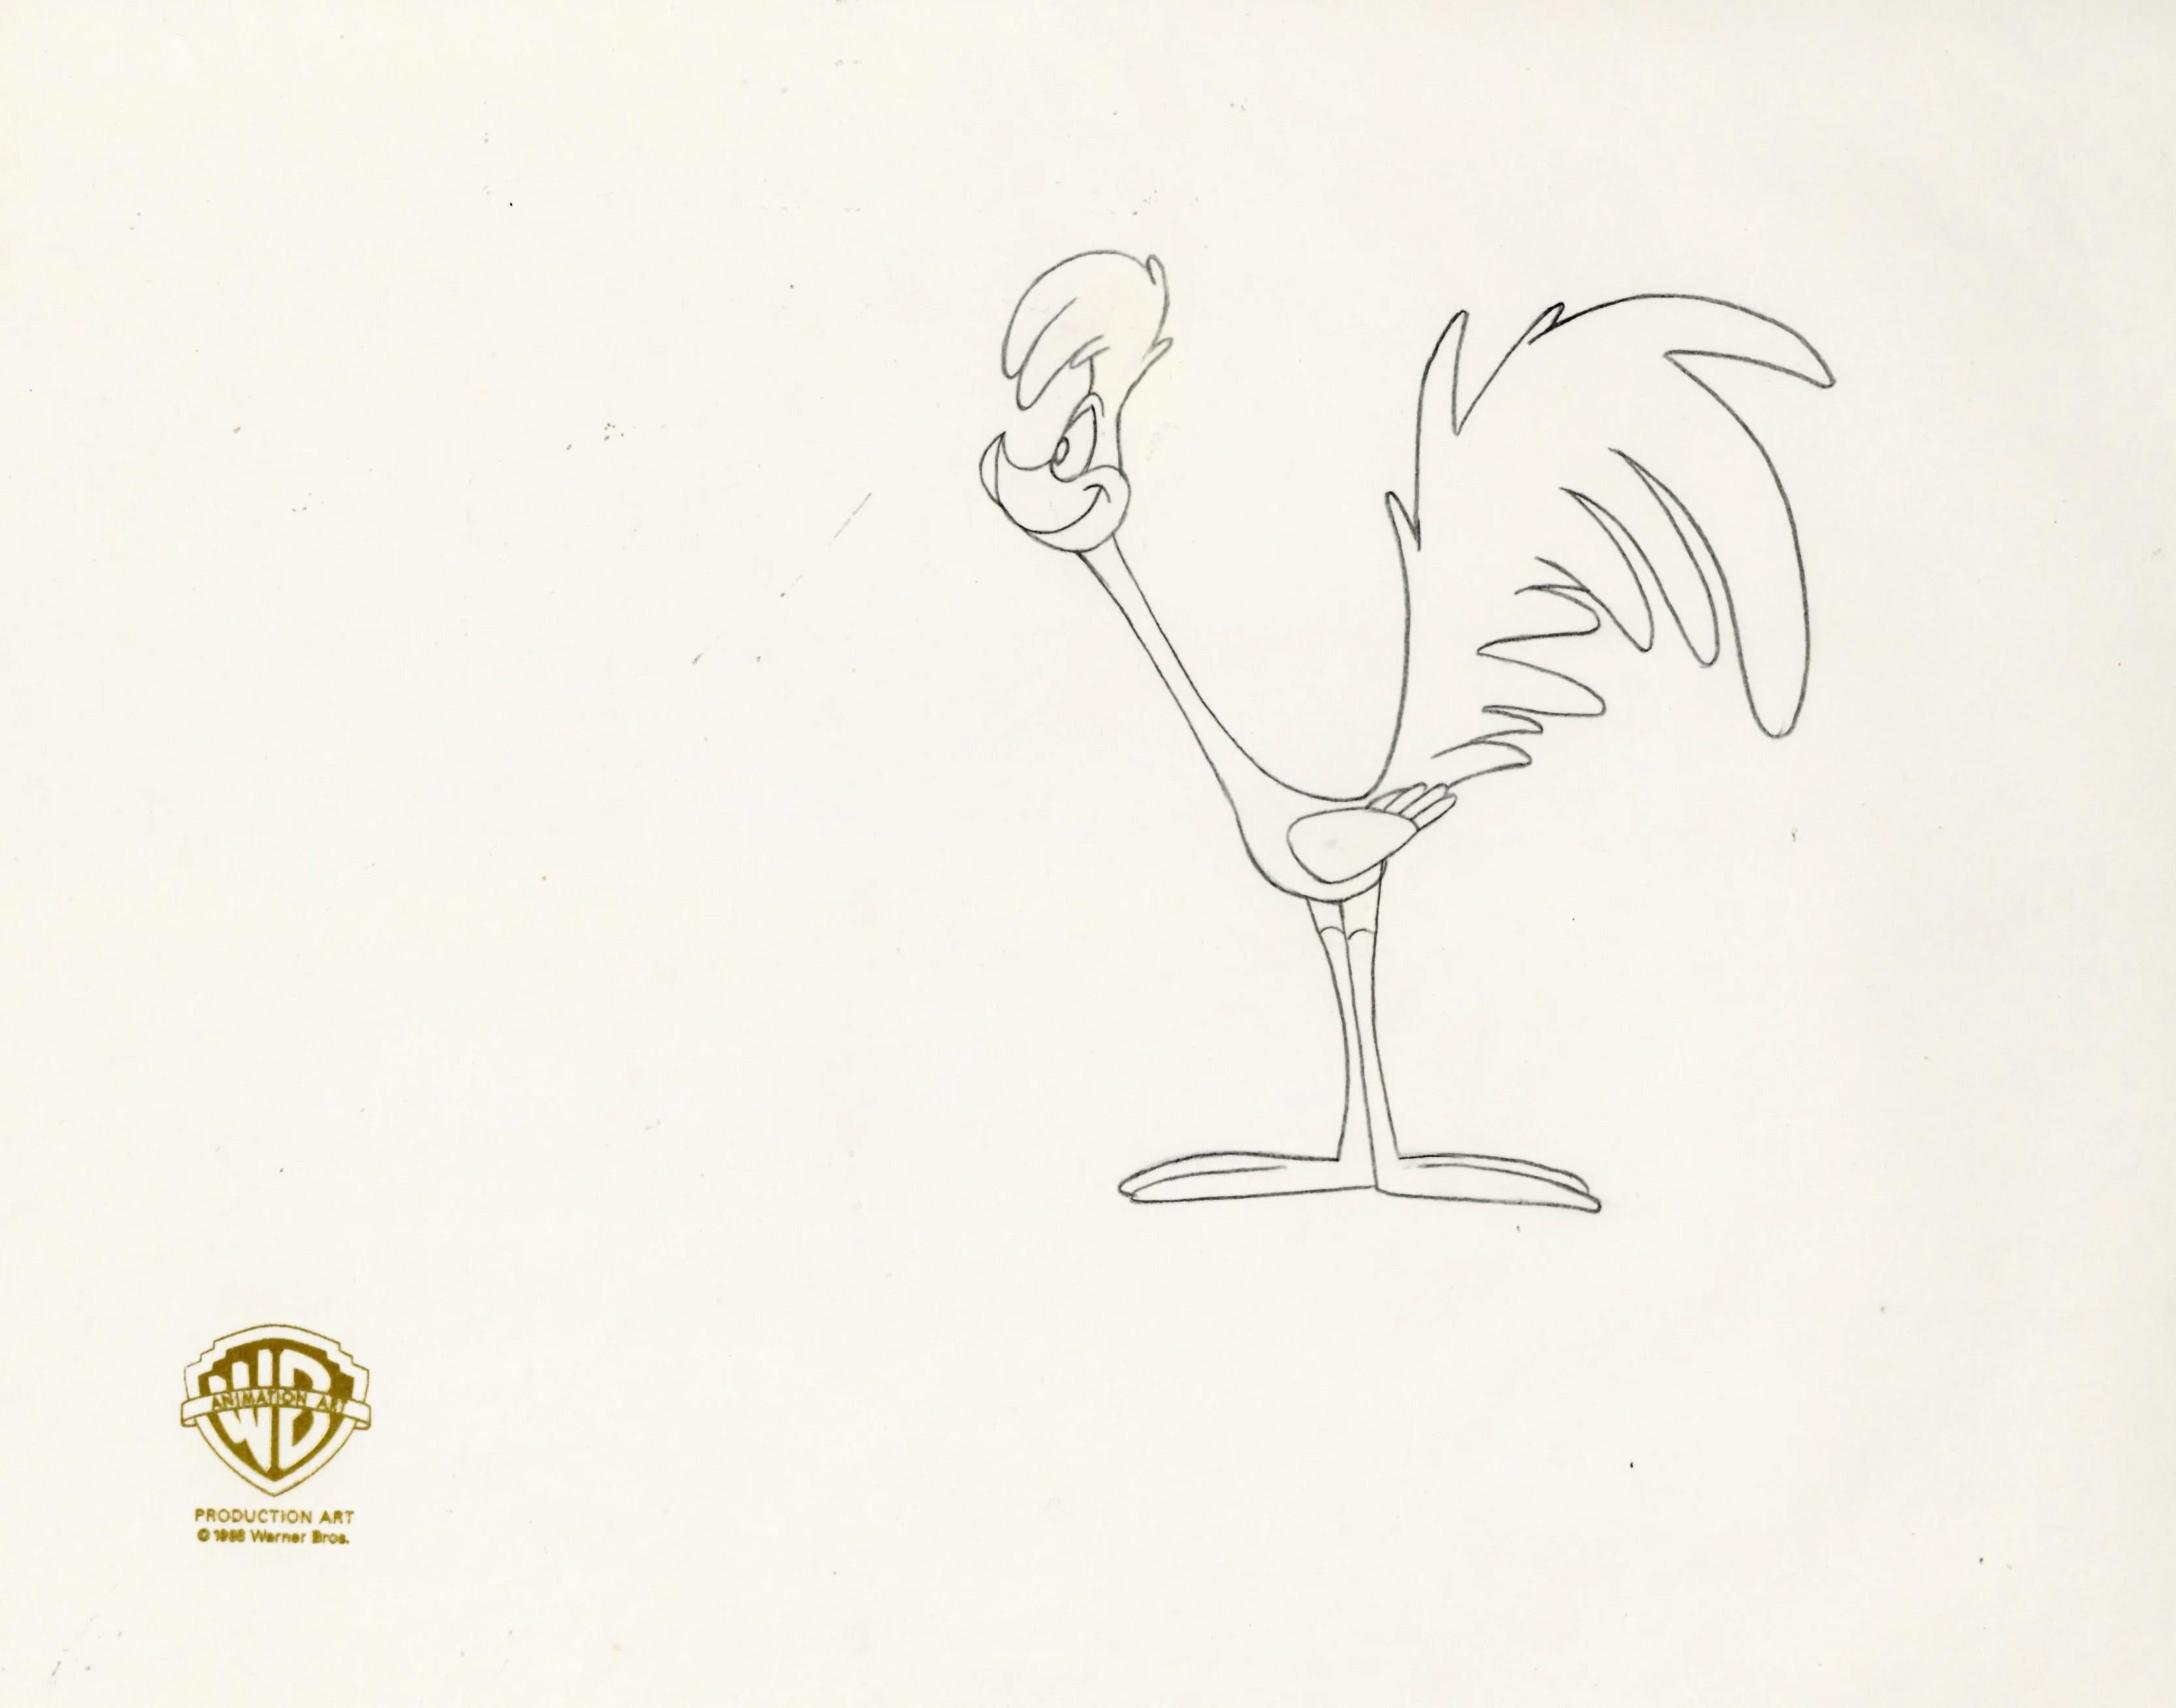 Looney Tunes Original Production Drawing: Wile E. Coyote - Art by Looney Tunes Studio Artists